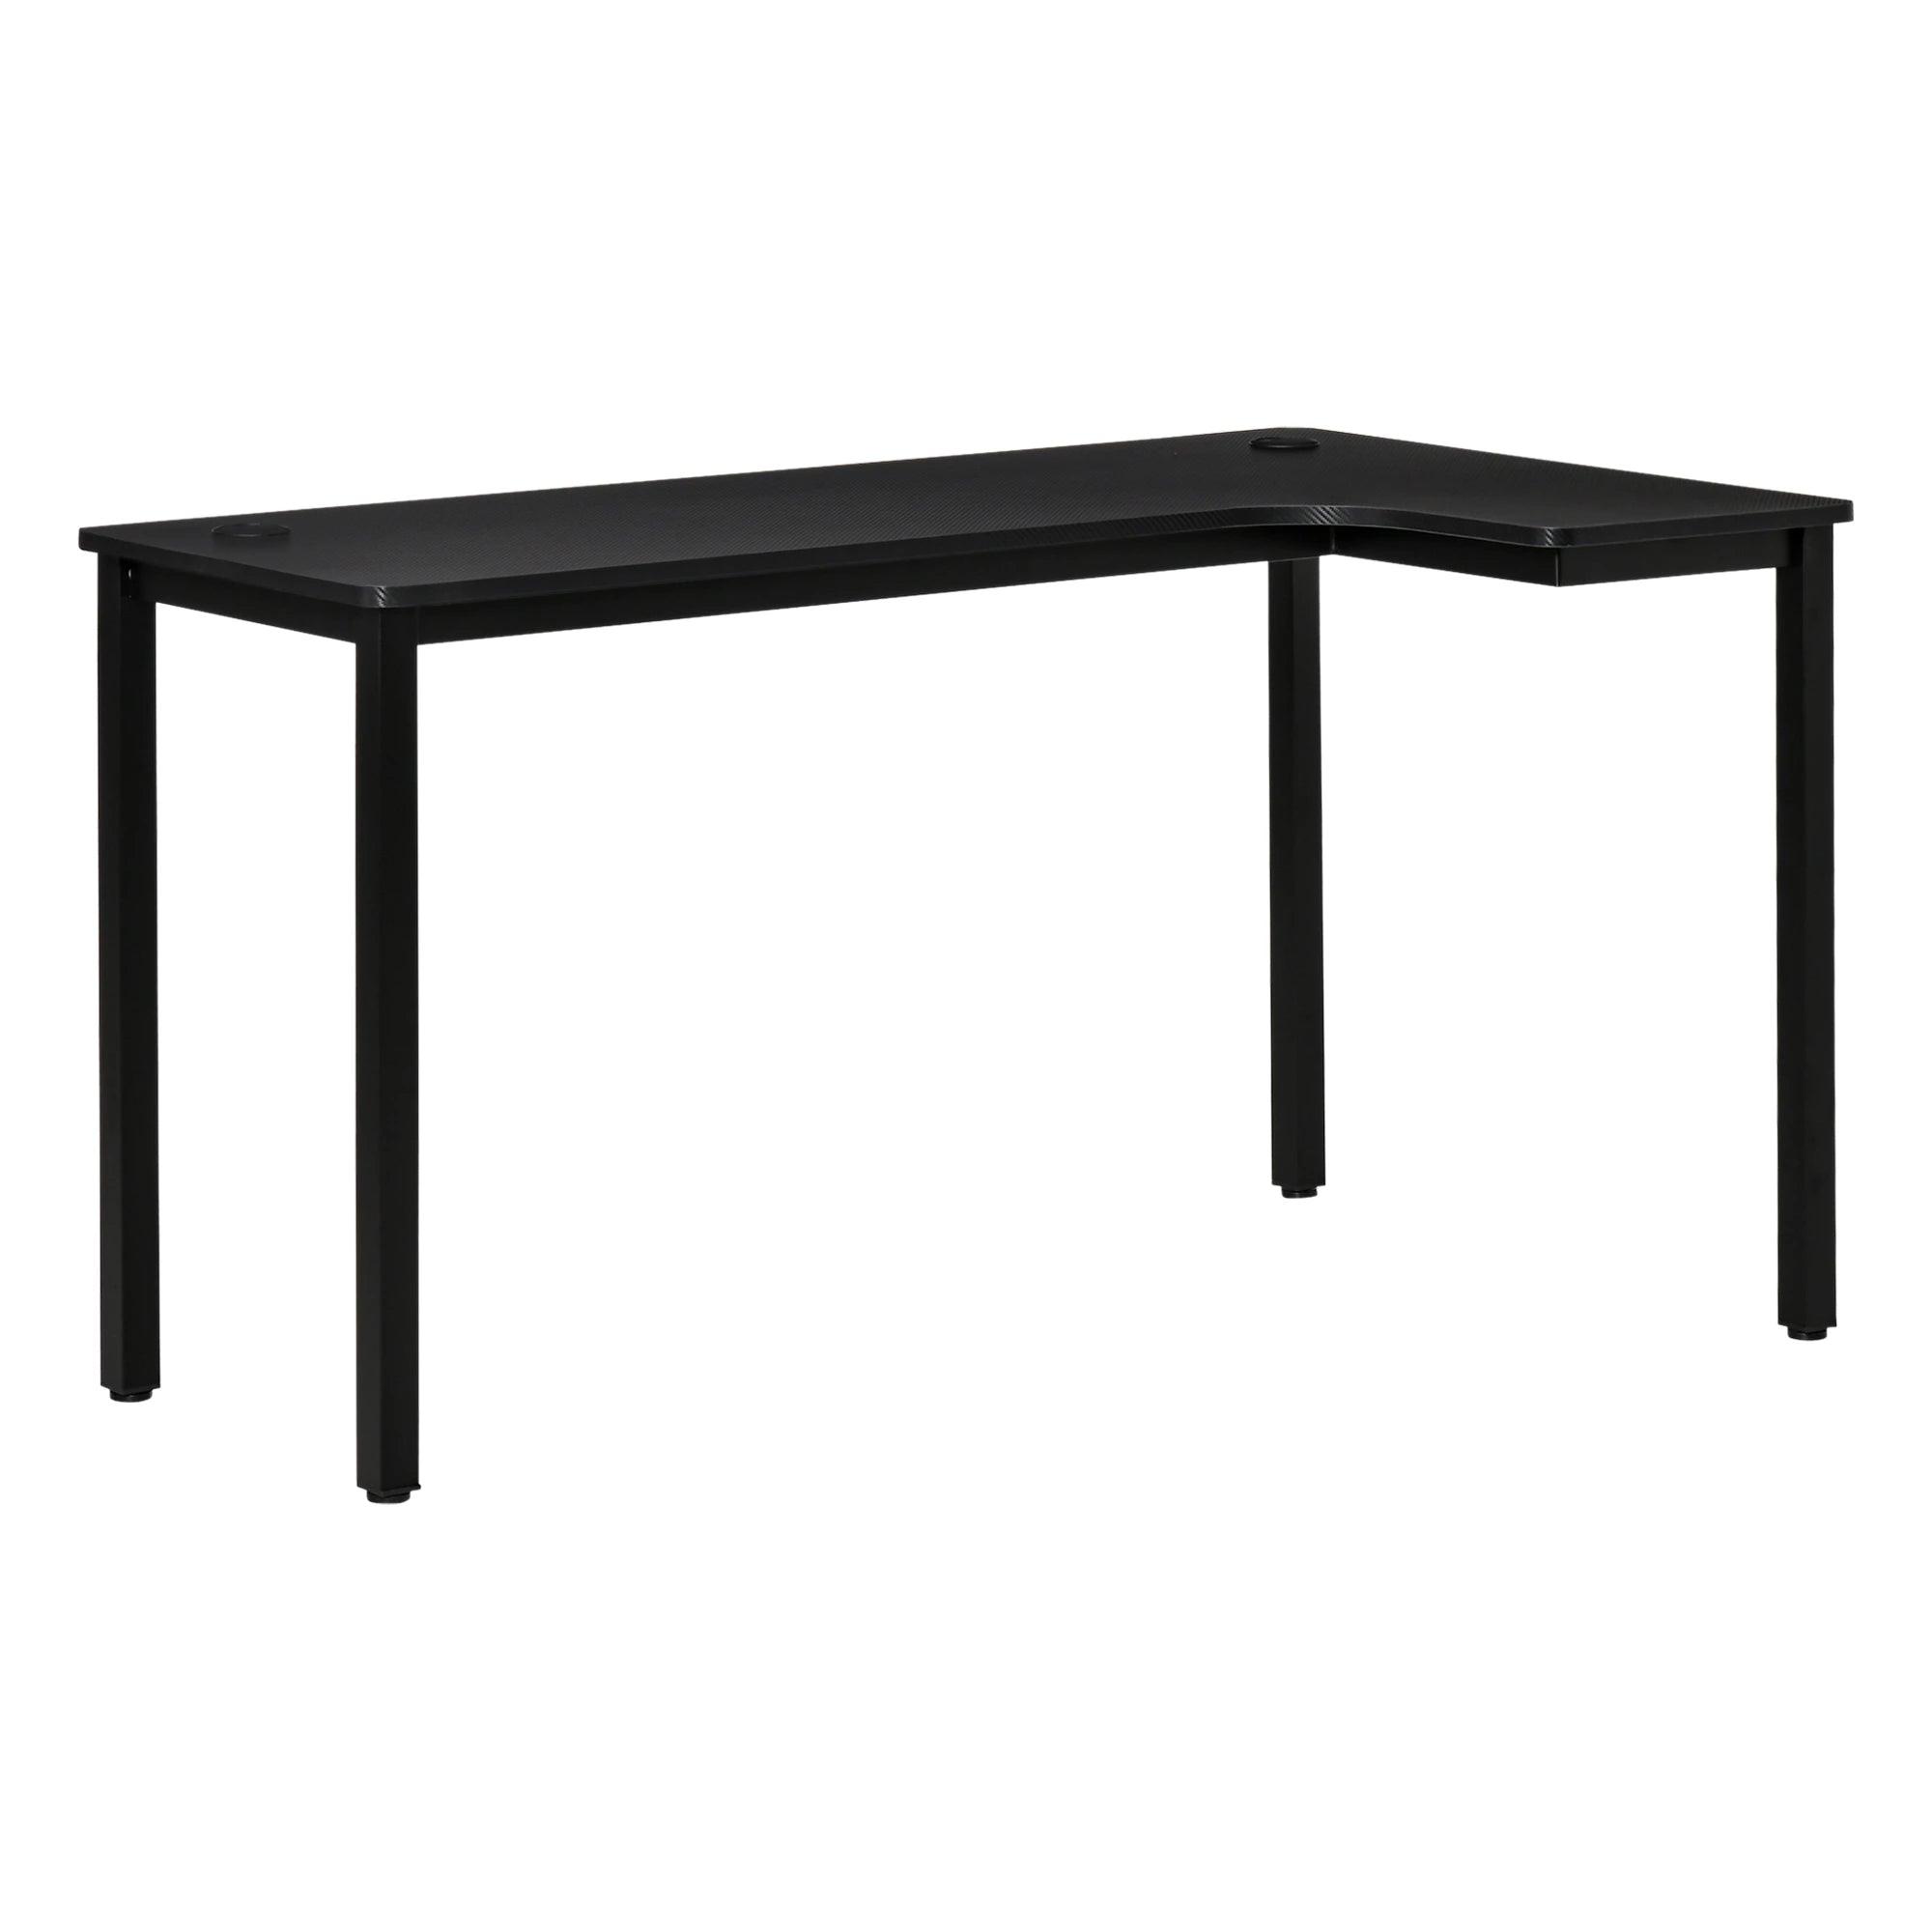 L-Shaped Desk, 57 Inch Corner Desk, Computer Table, Writing Workstation for Home Office with Cable Management, Black